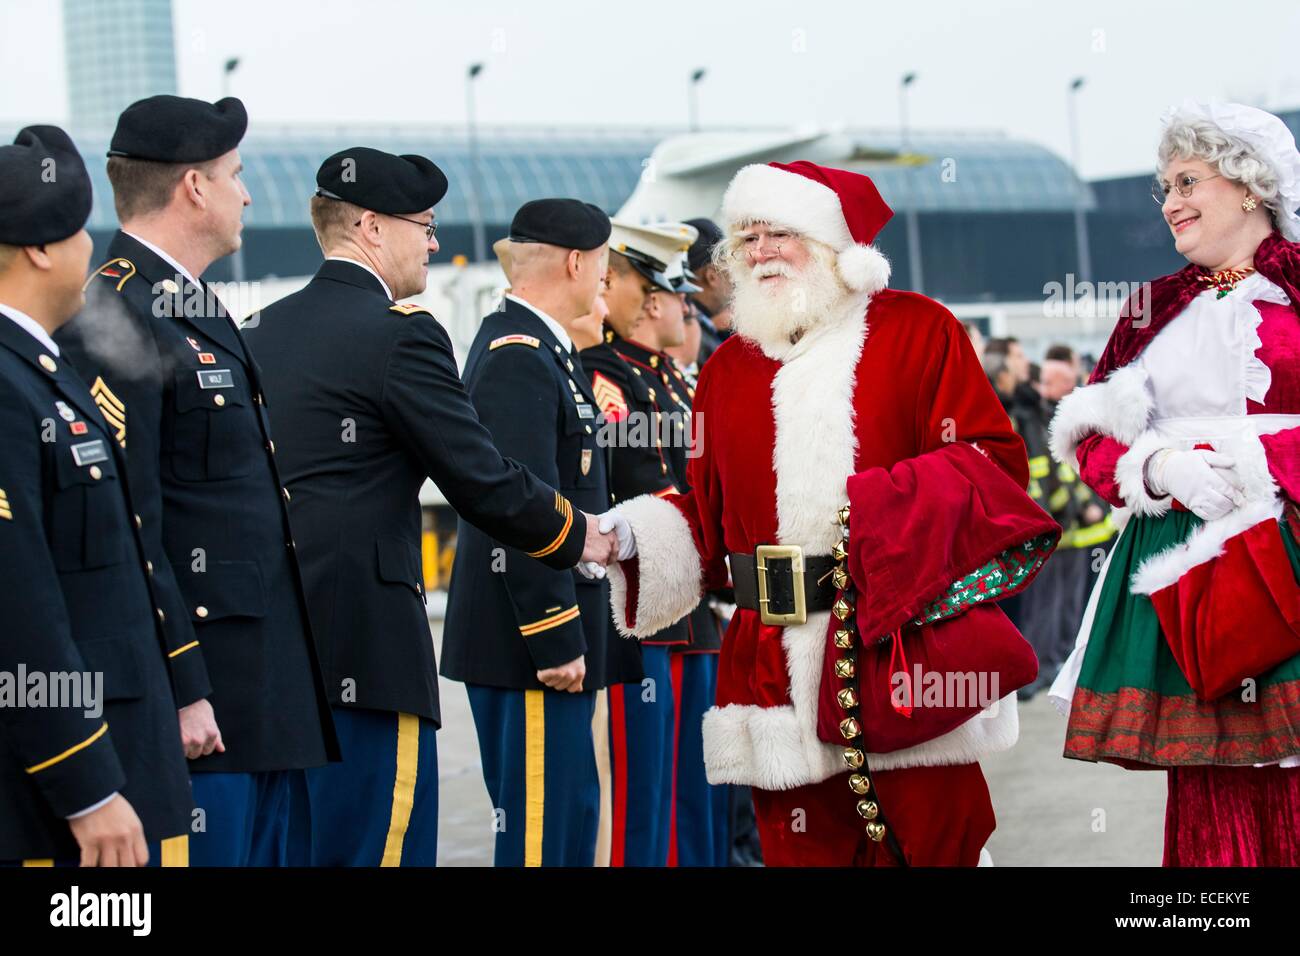 Mr. and Mrs. Santa Claus shake hands with military service members during a Snowball Express farewell ceremony at O'Hare International Airport December 11, 2014 in Chicago, IL.  Snowball Express is a nonprofit organization that organizes all-expenses-paid trip for children and spouses who have lost a fallen military family member. Stock Photo